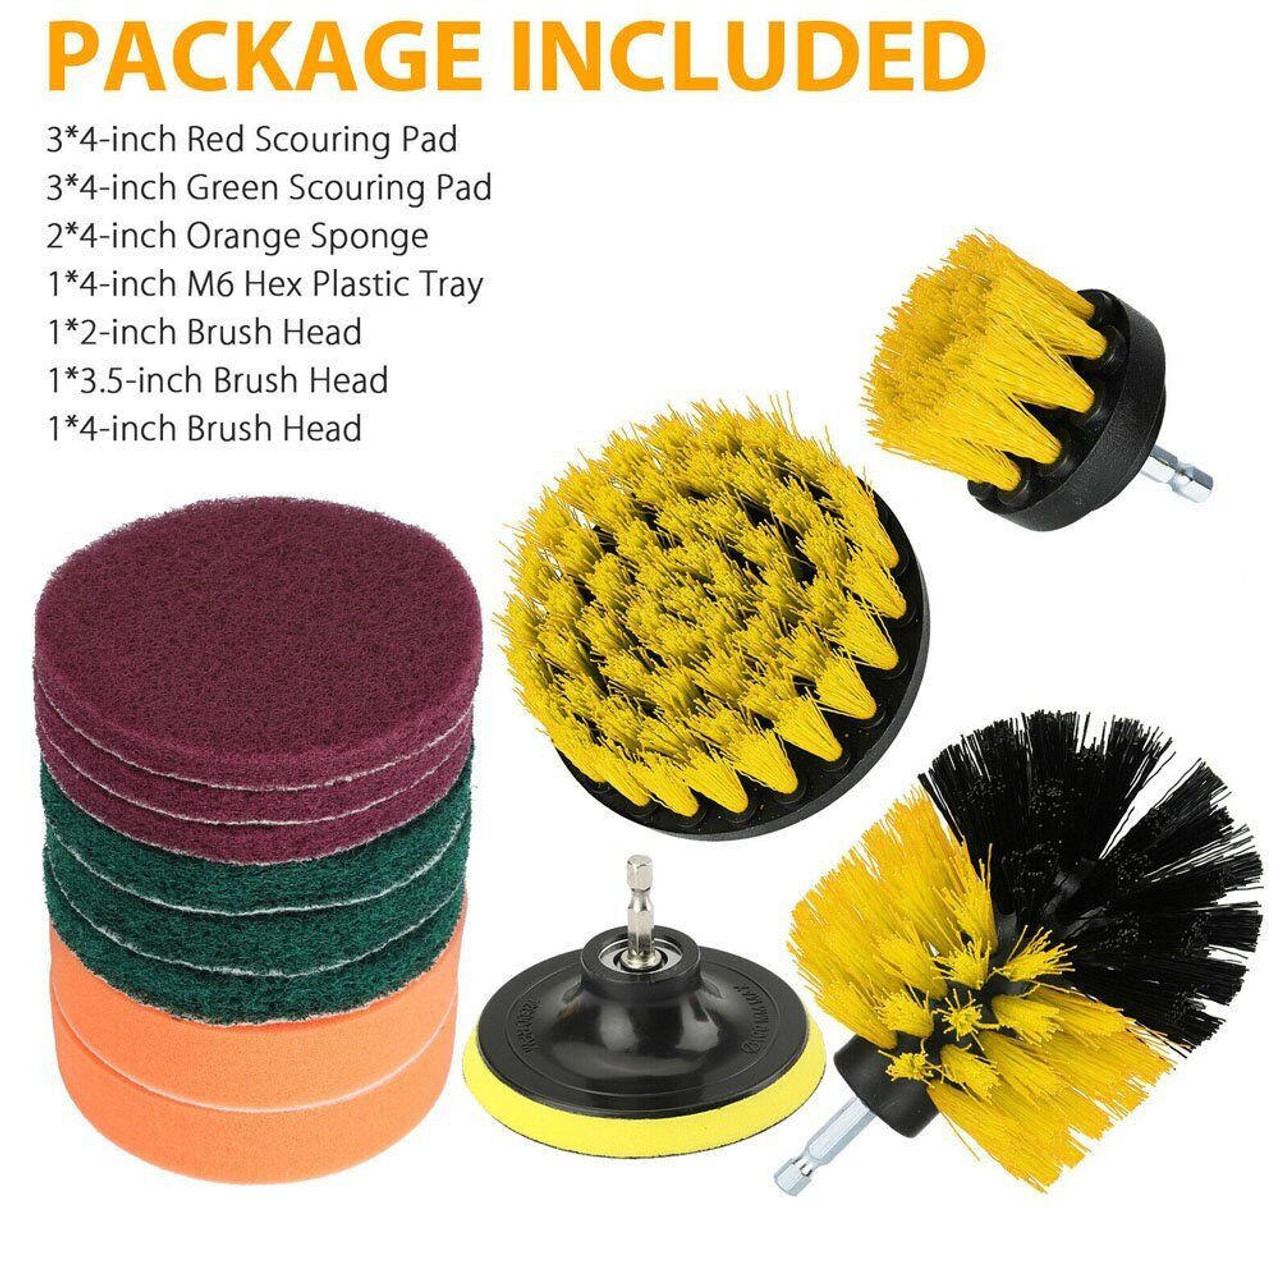 https://cdn11.bigcommerce.com/s-zrh8tkpr8d/images/stencil/1280x1280/products/10076/31464/1221-pcs-electric-drill-brush-attachment-set-cleaning-kit-power-scrubber-pads__24525.1675296151.jpg?c=2&imbypass=on